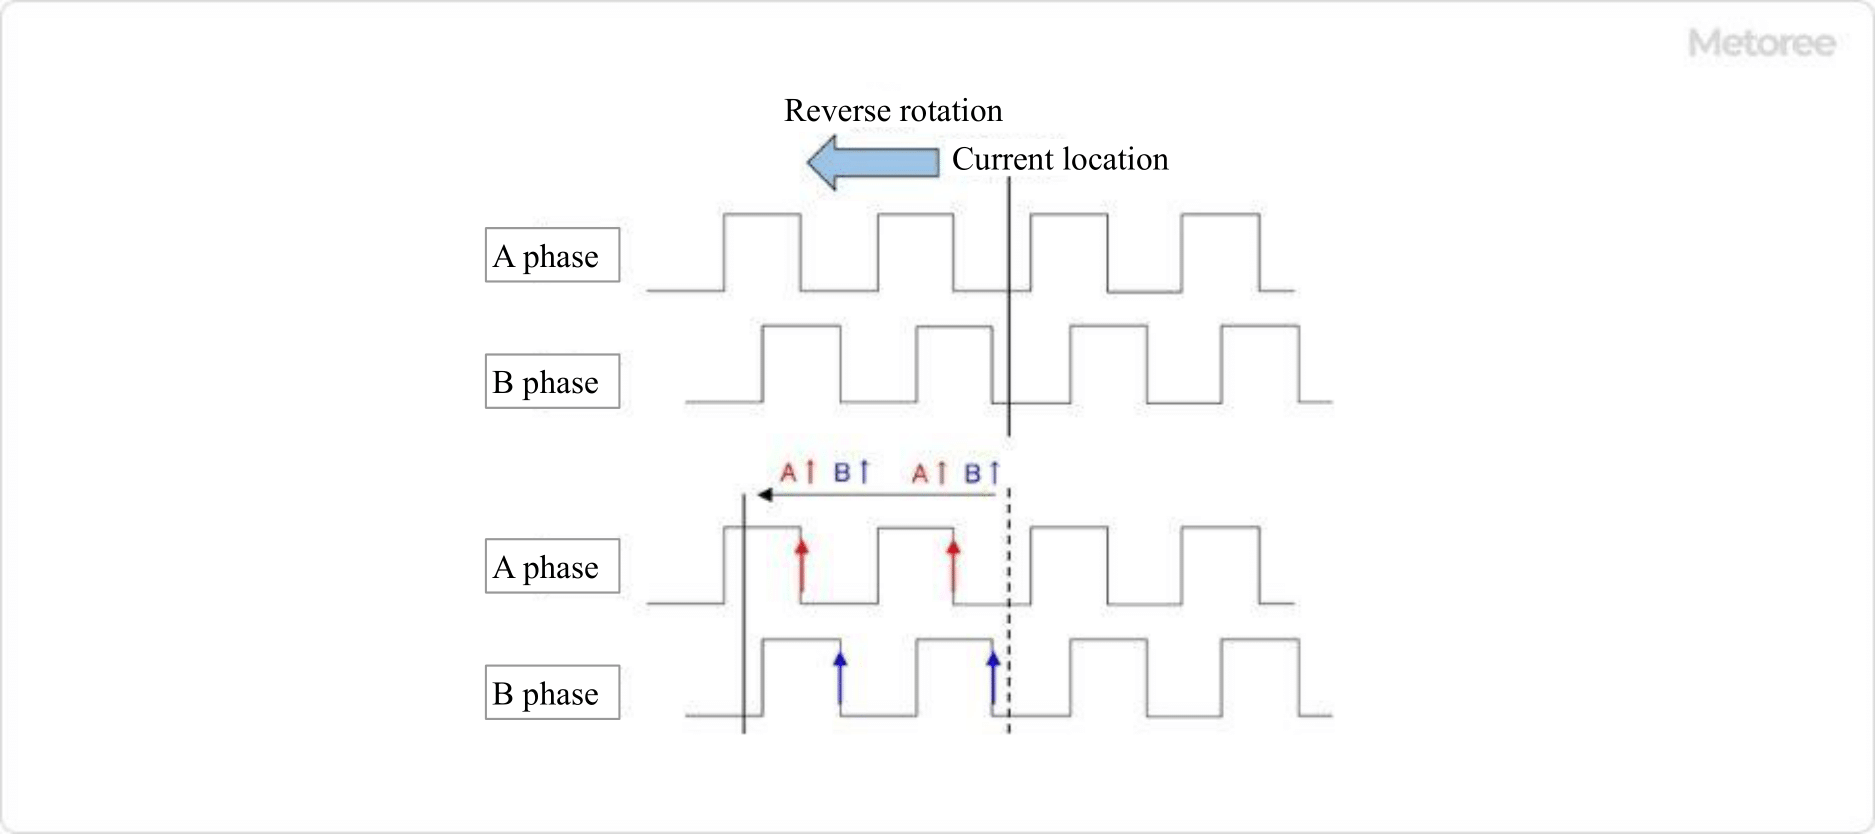 Figure 3. Detection order of phases A and B during reverse rotation